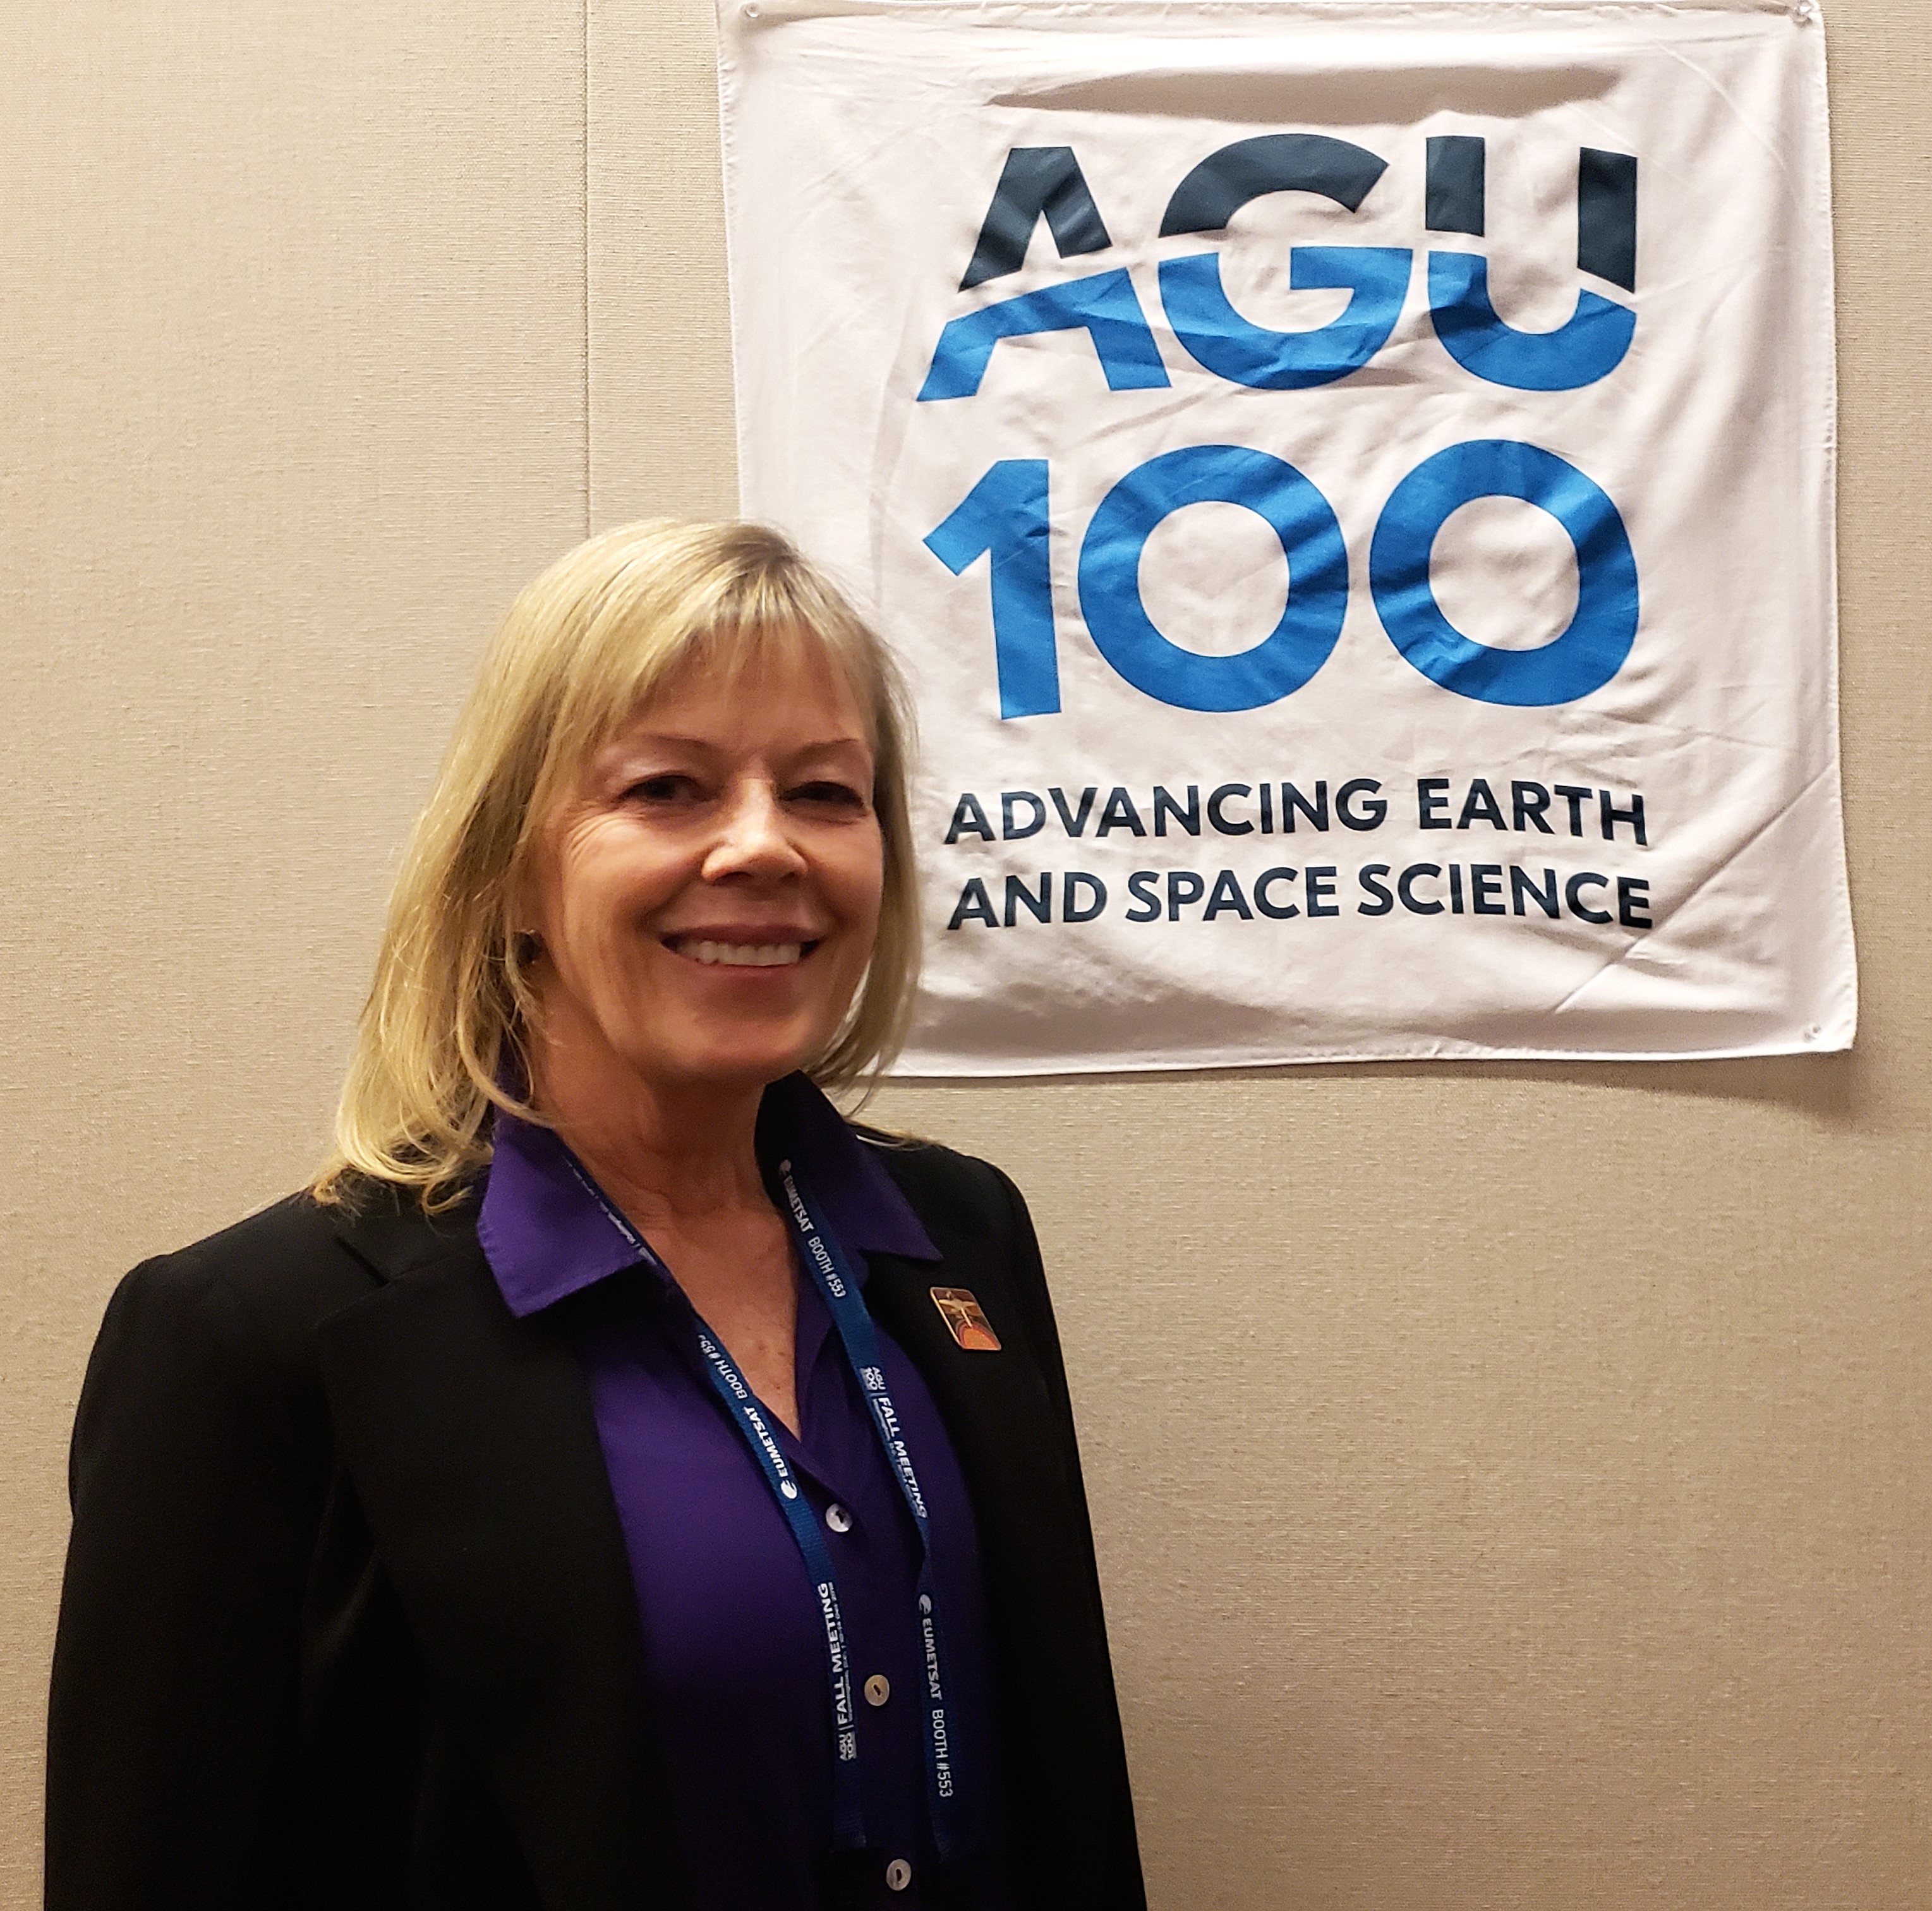 "It never occurred to me to work in science communication" an interview with Laurie Cantillo